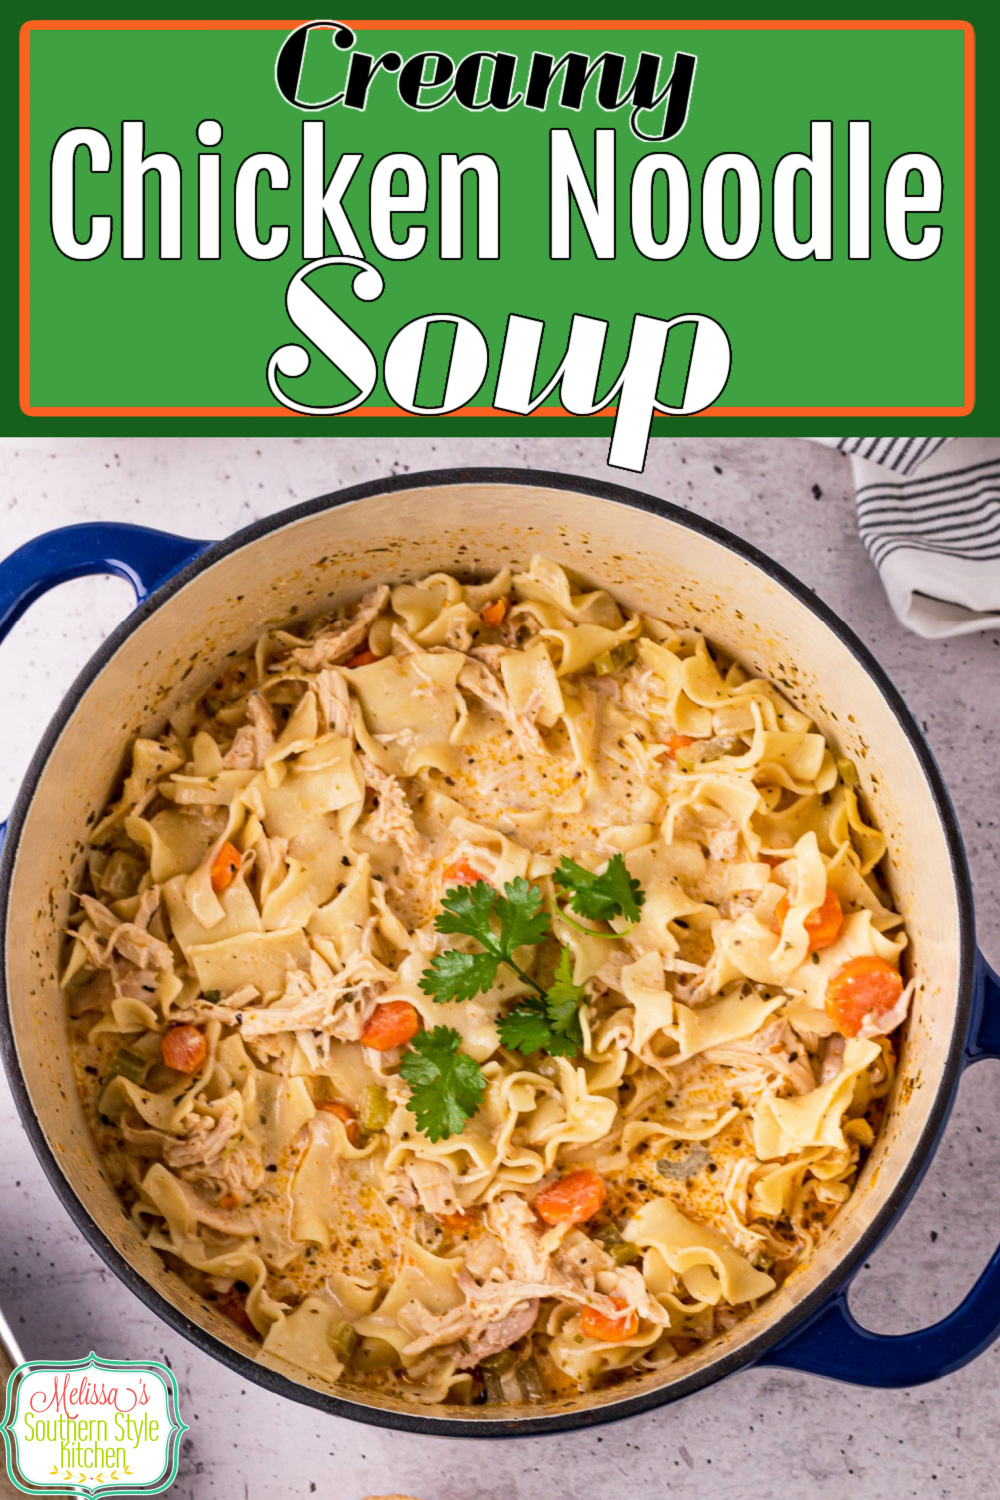 Cozy up to a bowl of Creamy Chicken Noodle Soup for supper #chickennoodlesoup #souprecipes #chickenrecipes #soup #creamychickennoodlesoup #easysouprecipes #dinnerideas via @melissasssk